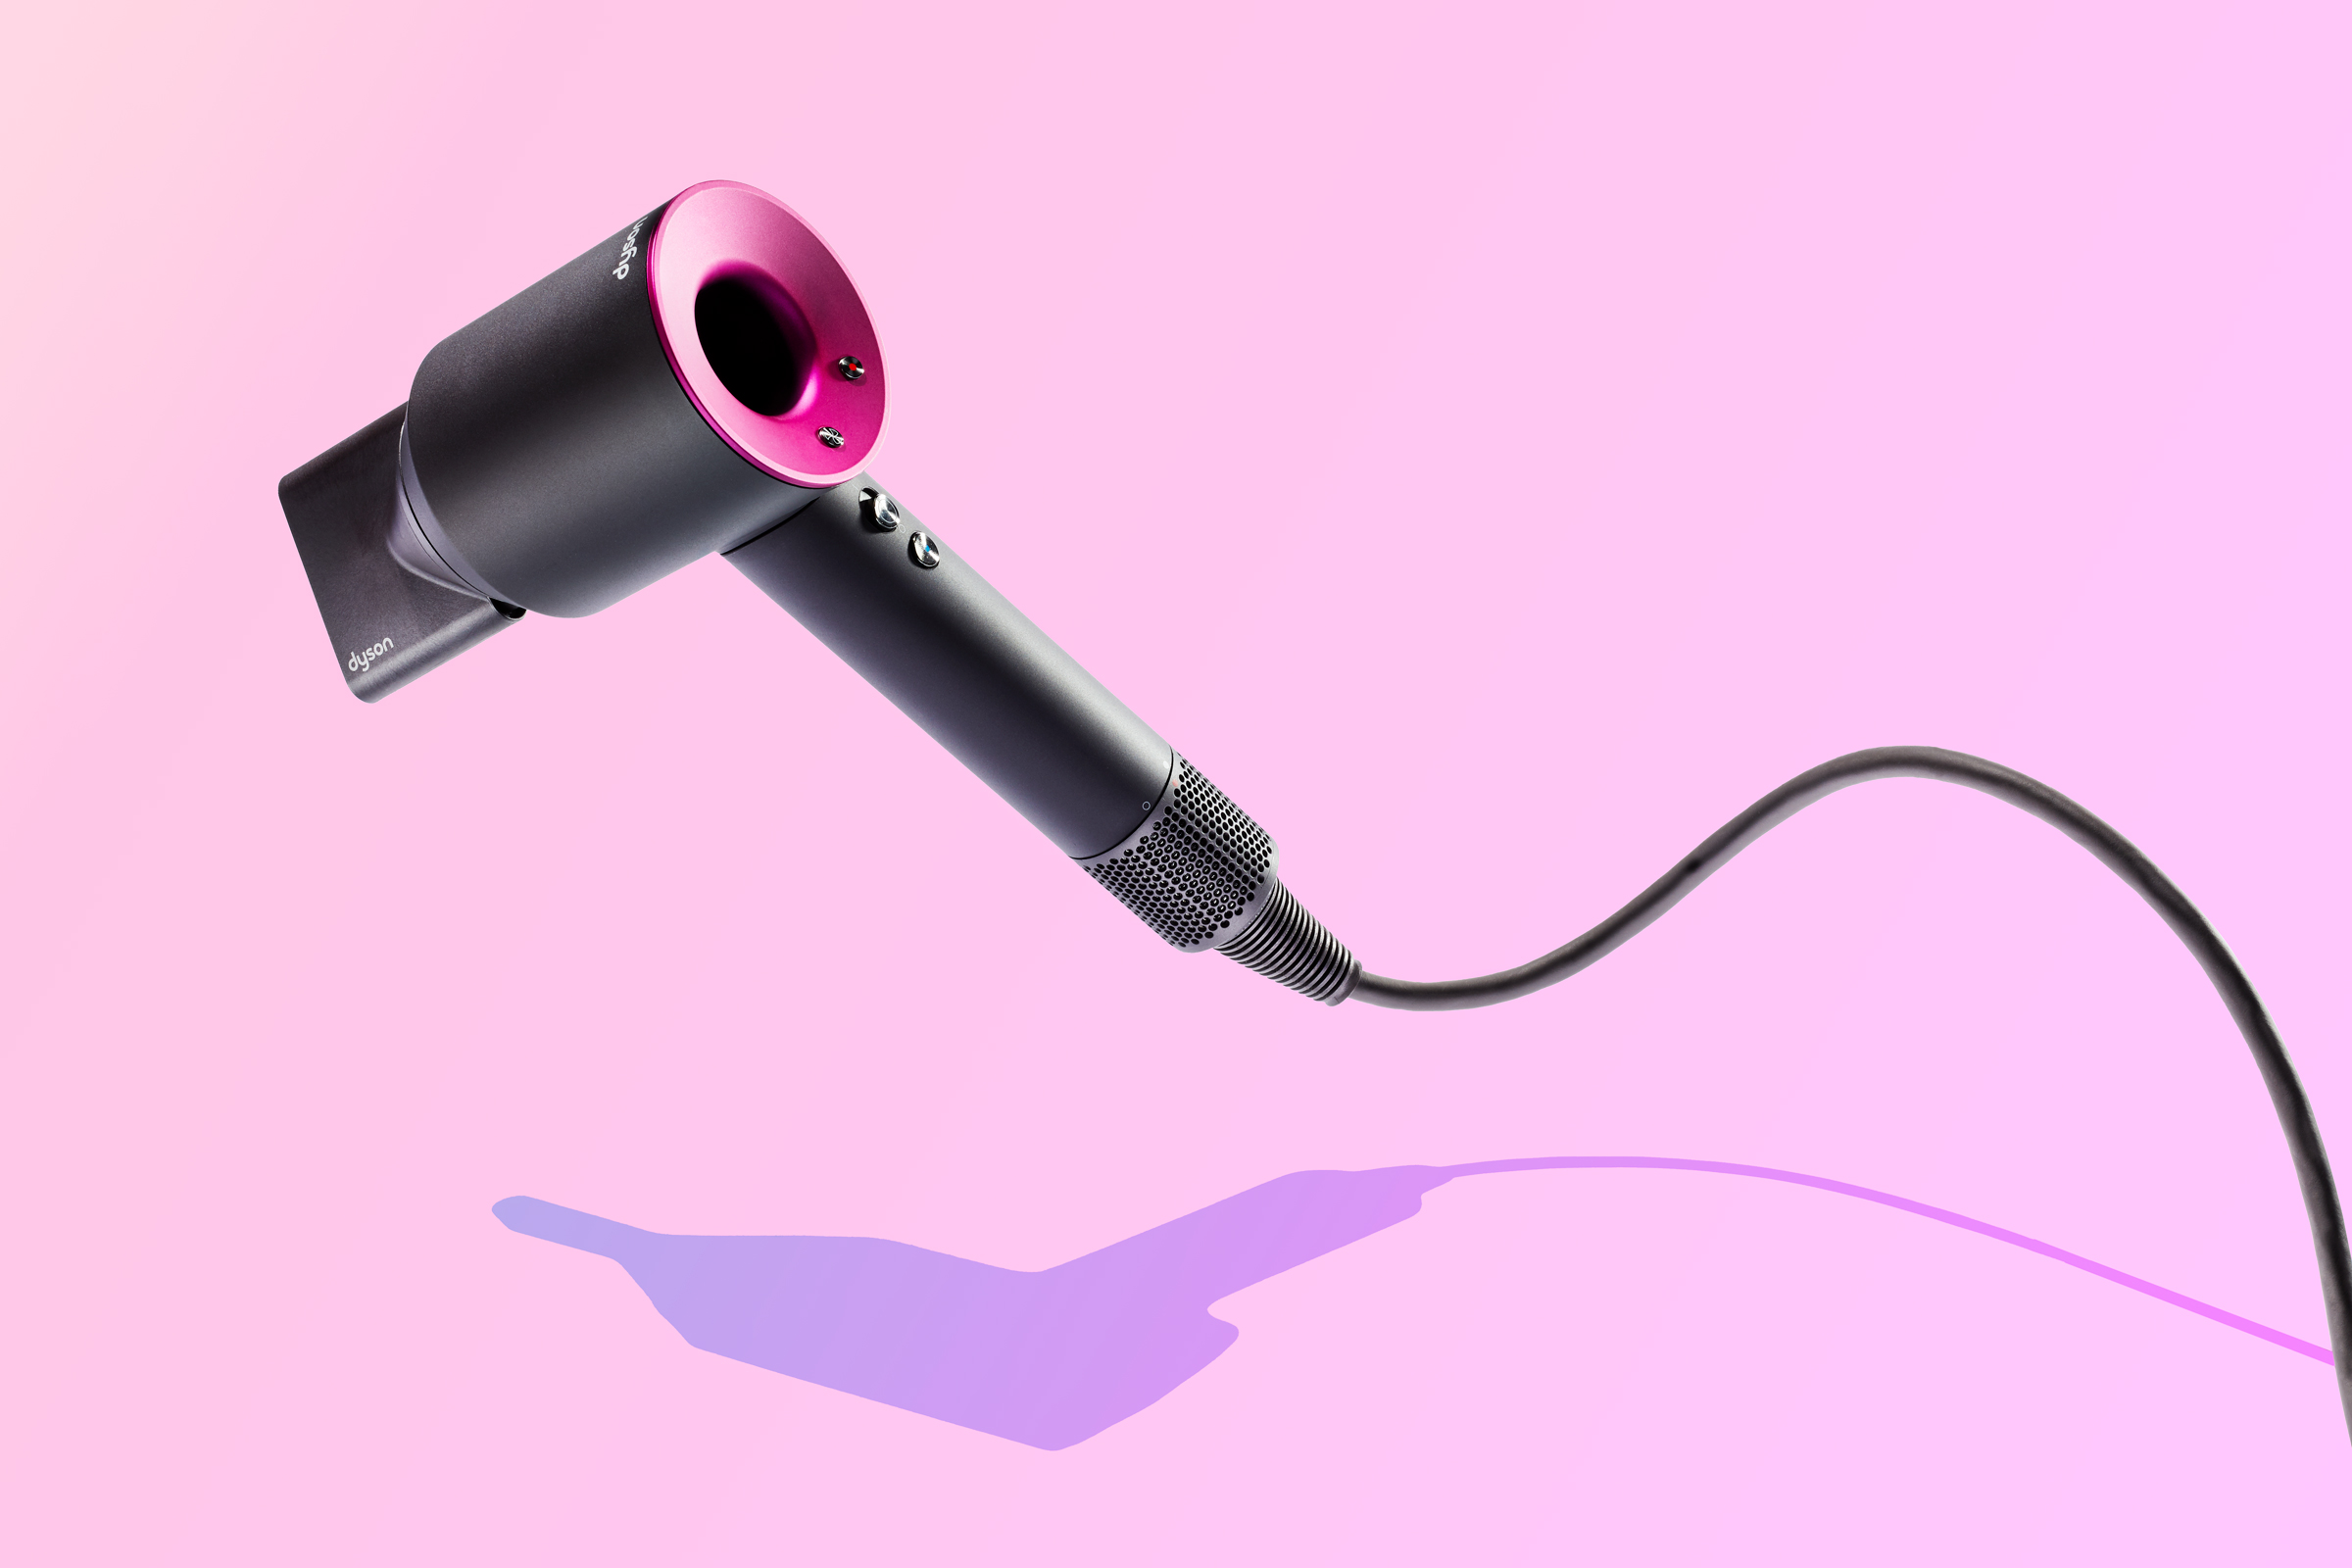 tidepool-simmons-dyson-hair-dryer-supersonic-pink-floatingdan-simmons-Tidepool-Reps